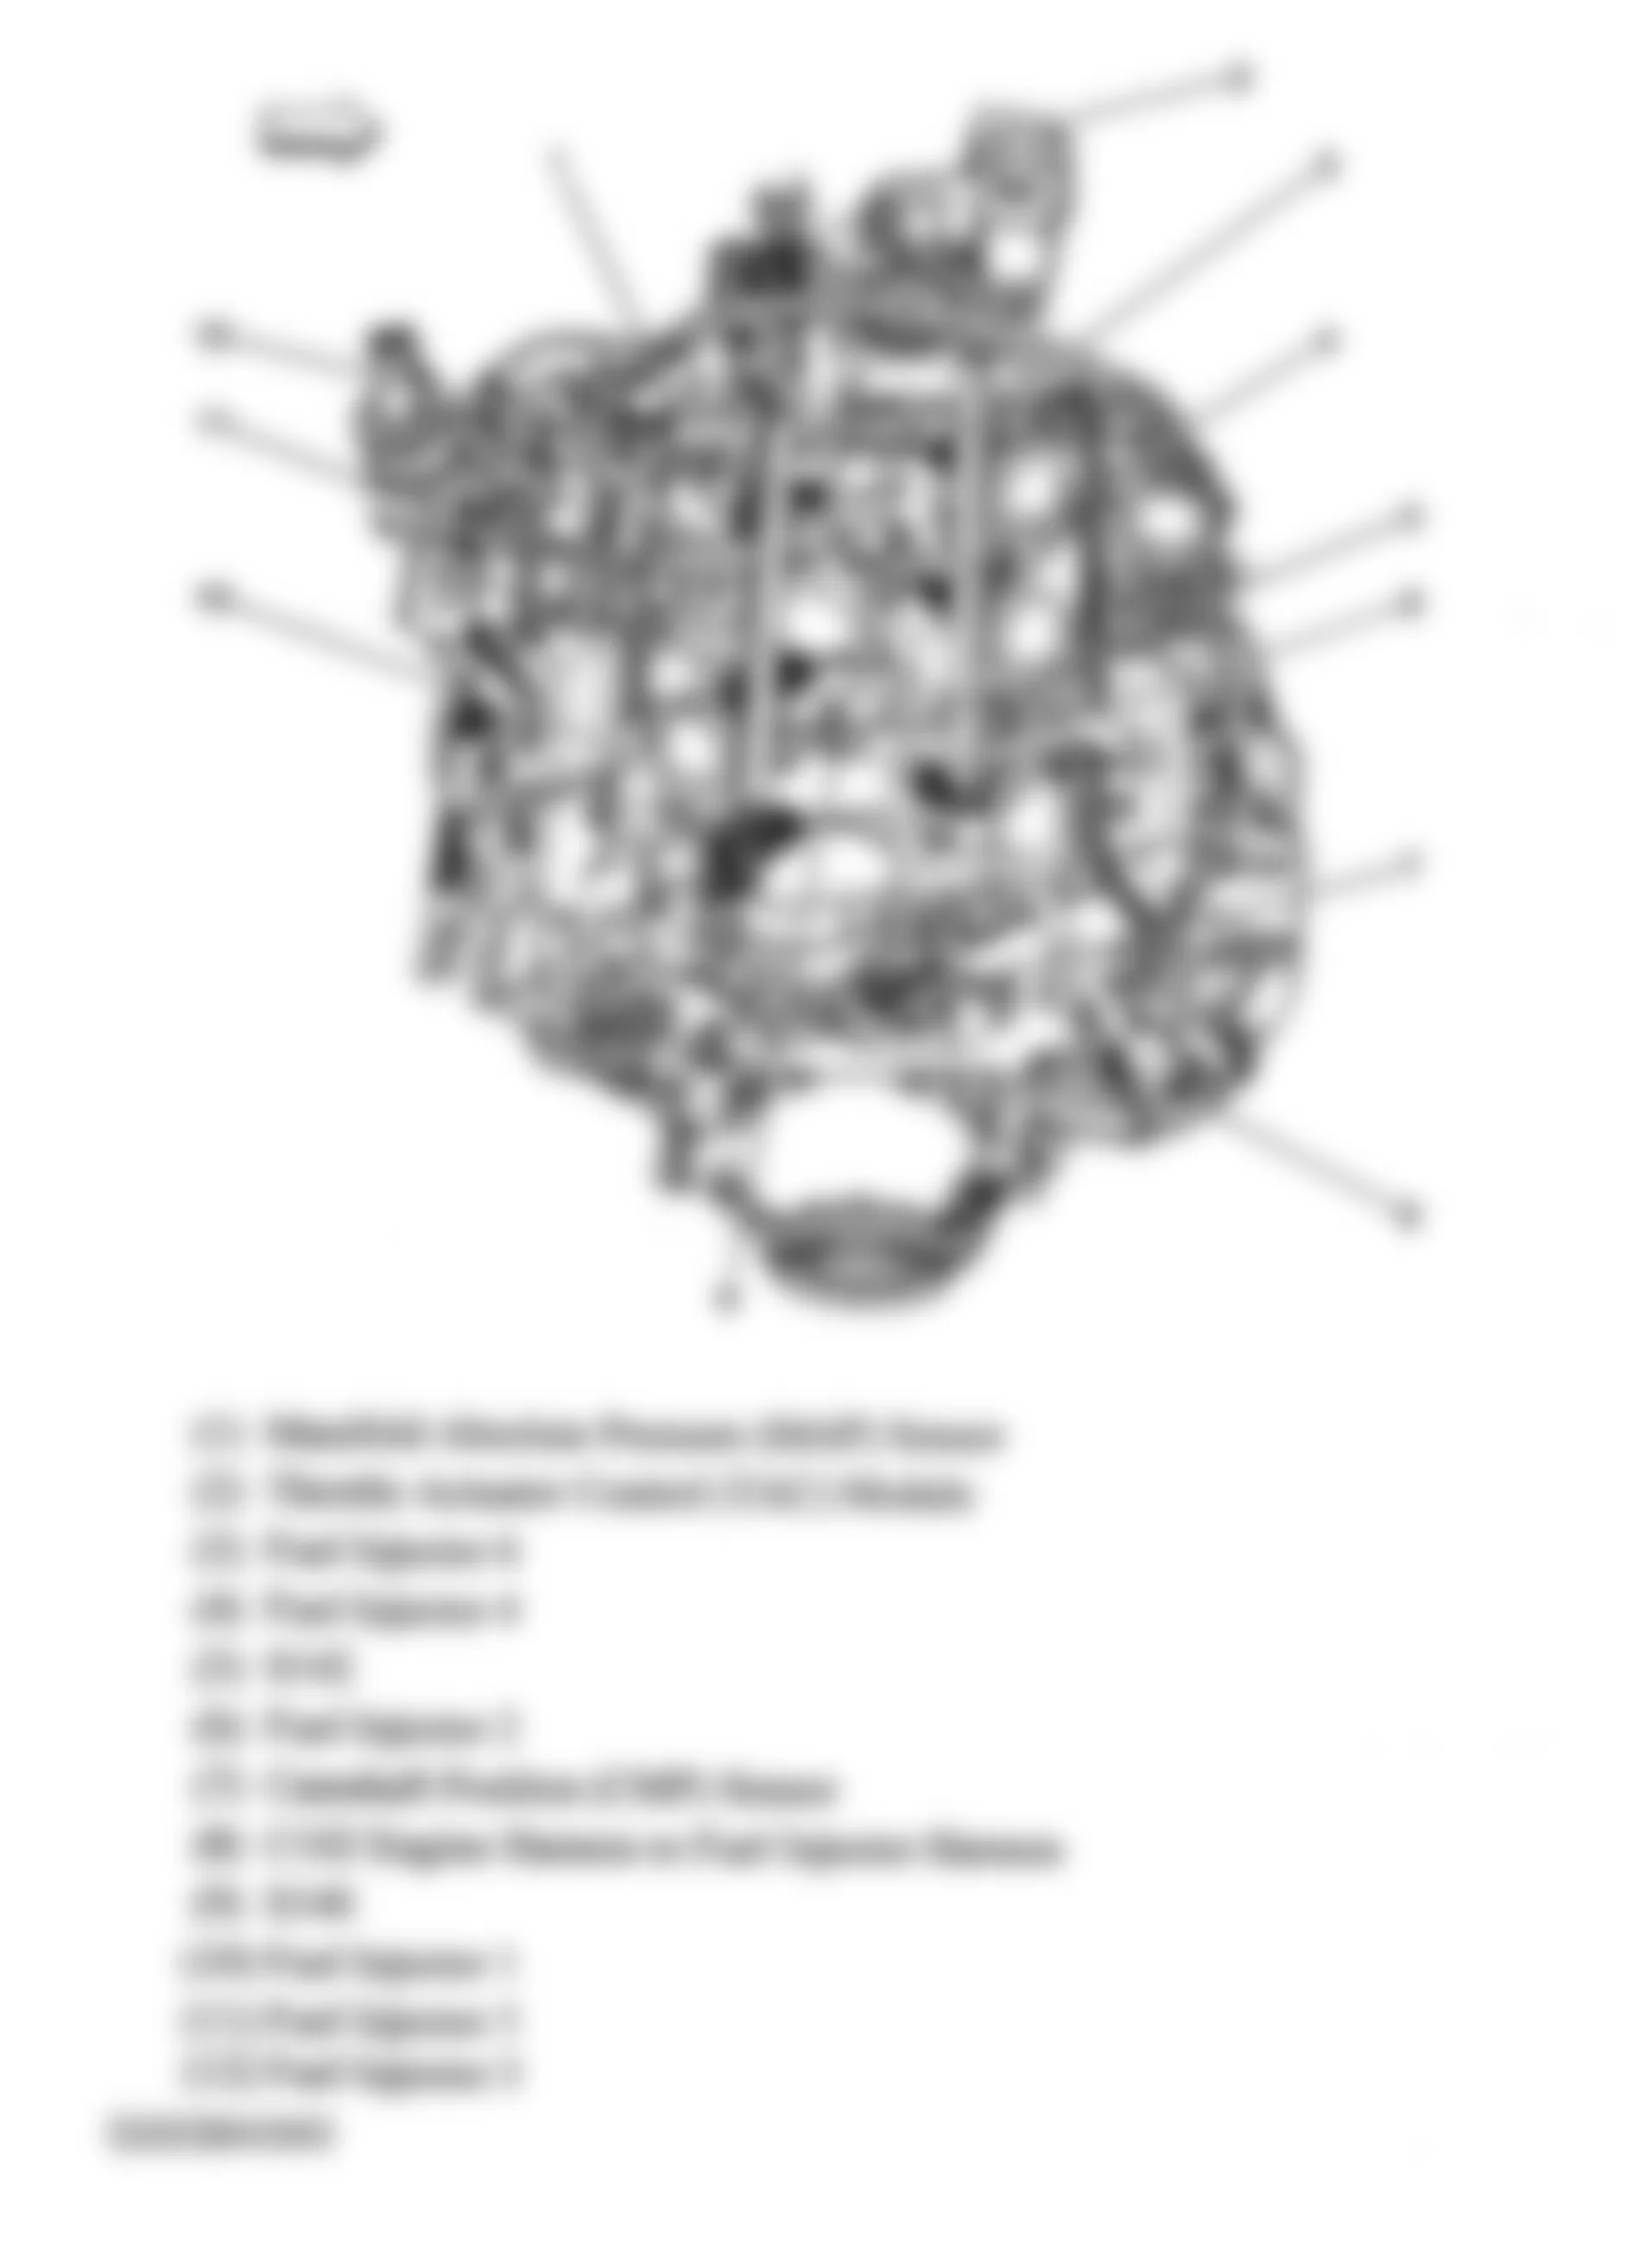 Buick Terraza CXL 2005 - Component Locations -  Engine Assembly